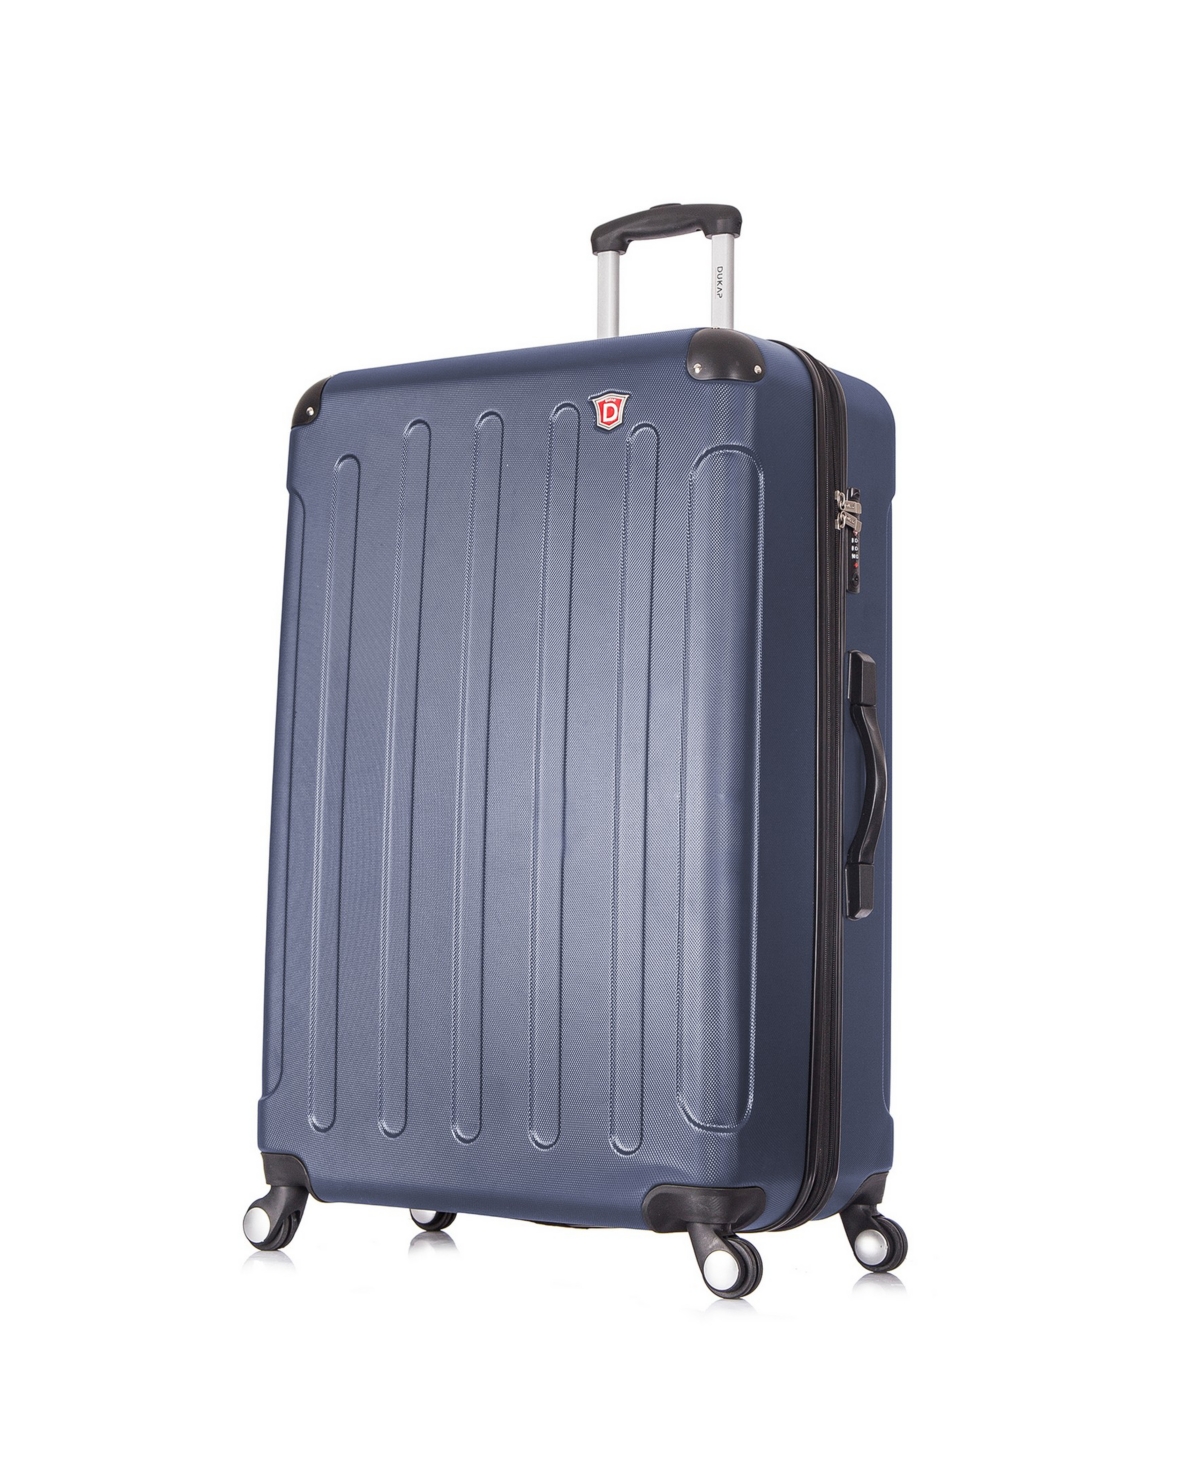 Intely 32" Hardside Spinner Luggage With Integrated Weight Scale - Grey